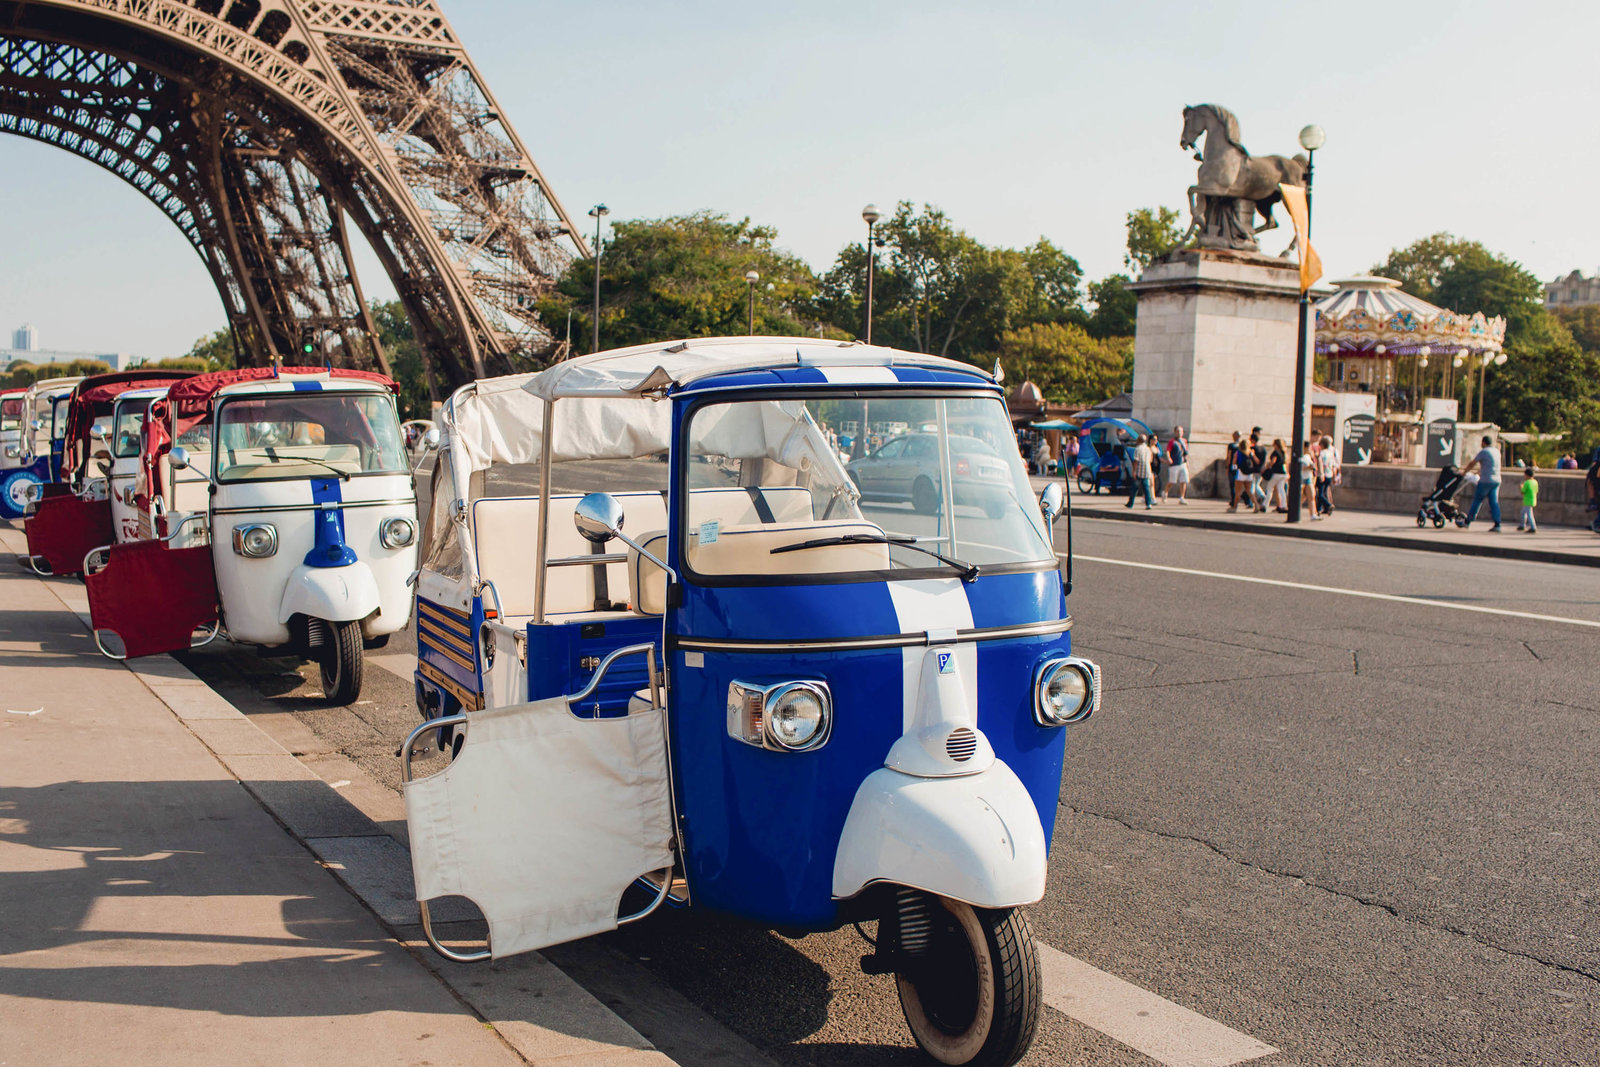 scooter-paris-france-travel-destination-wedding-kate-timbers-photography-1737